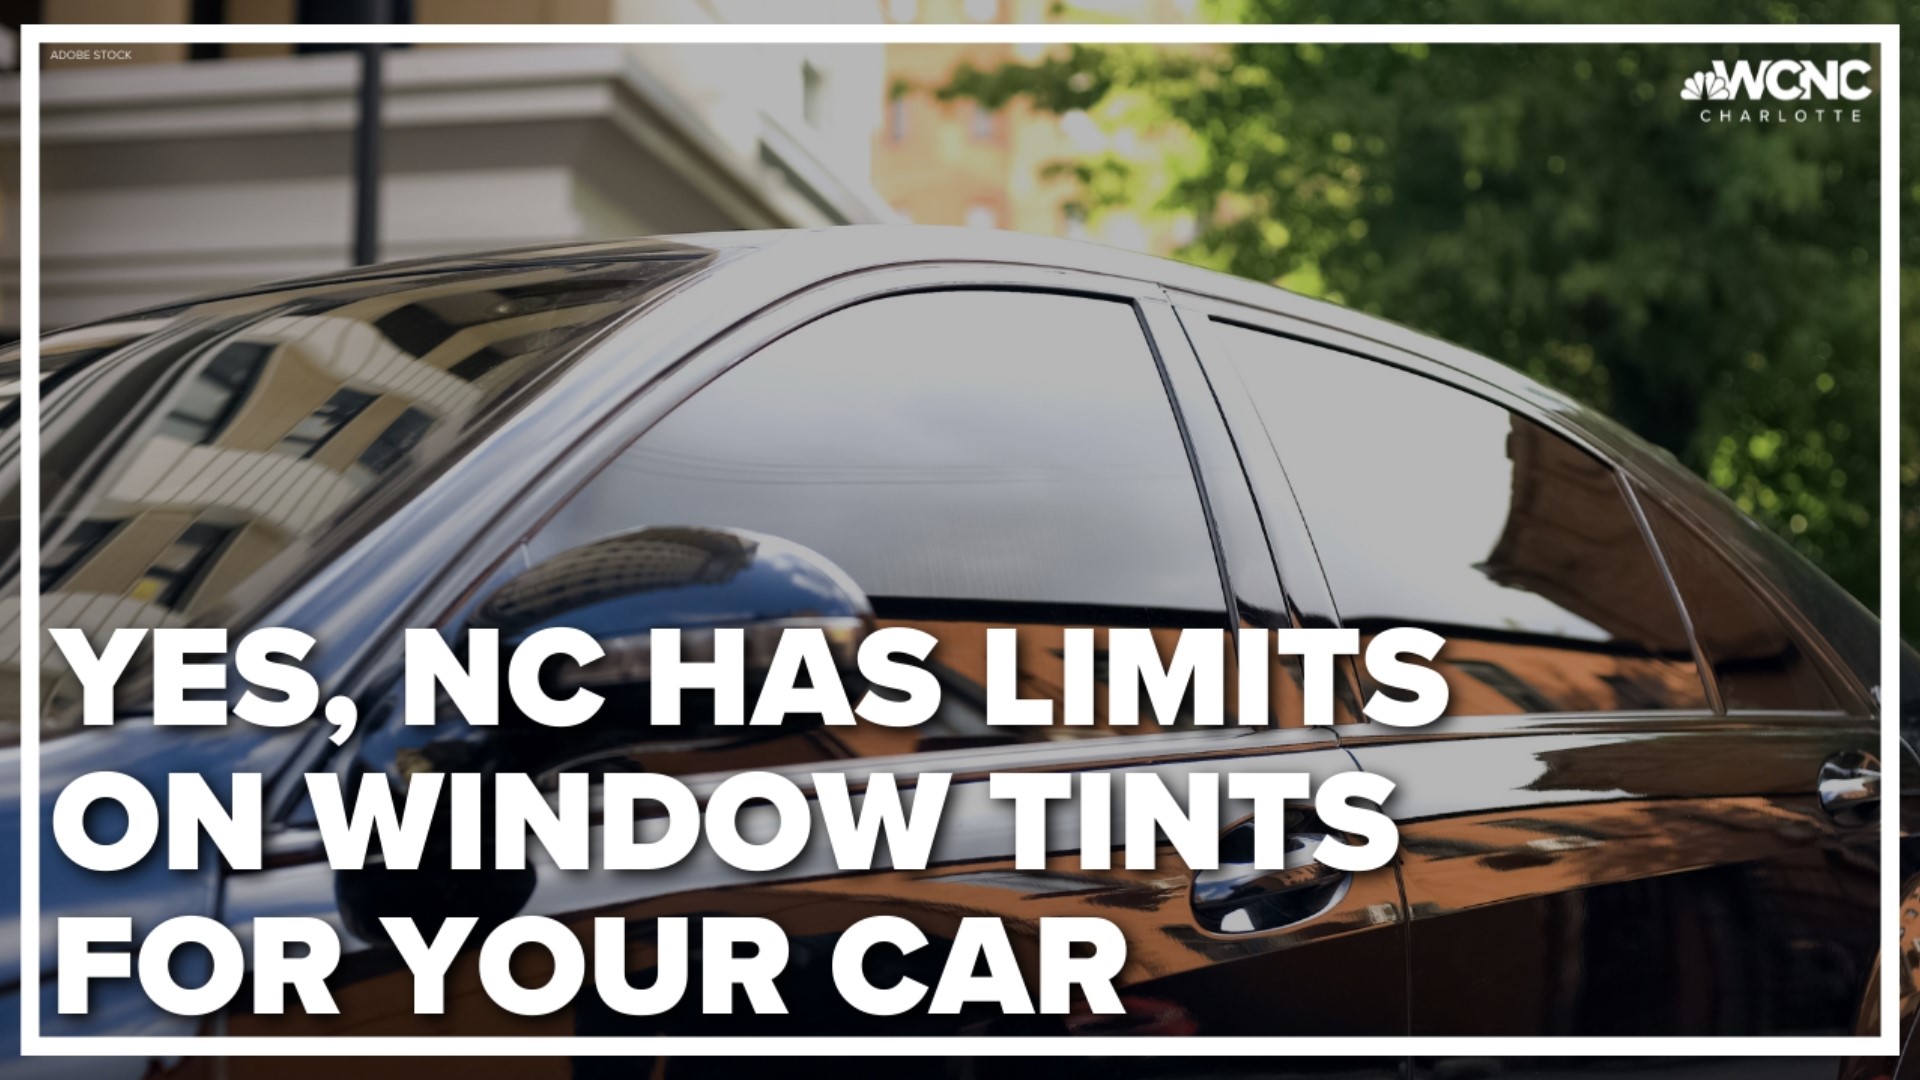 As warmer weather settles in the Carolinas, many people are looking for ways to stay cool. Tinted windows on your car can help cut down on the heat.